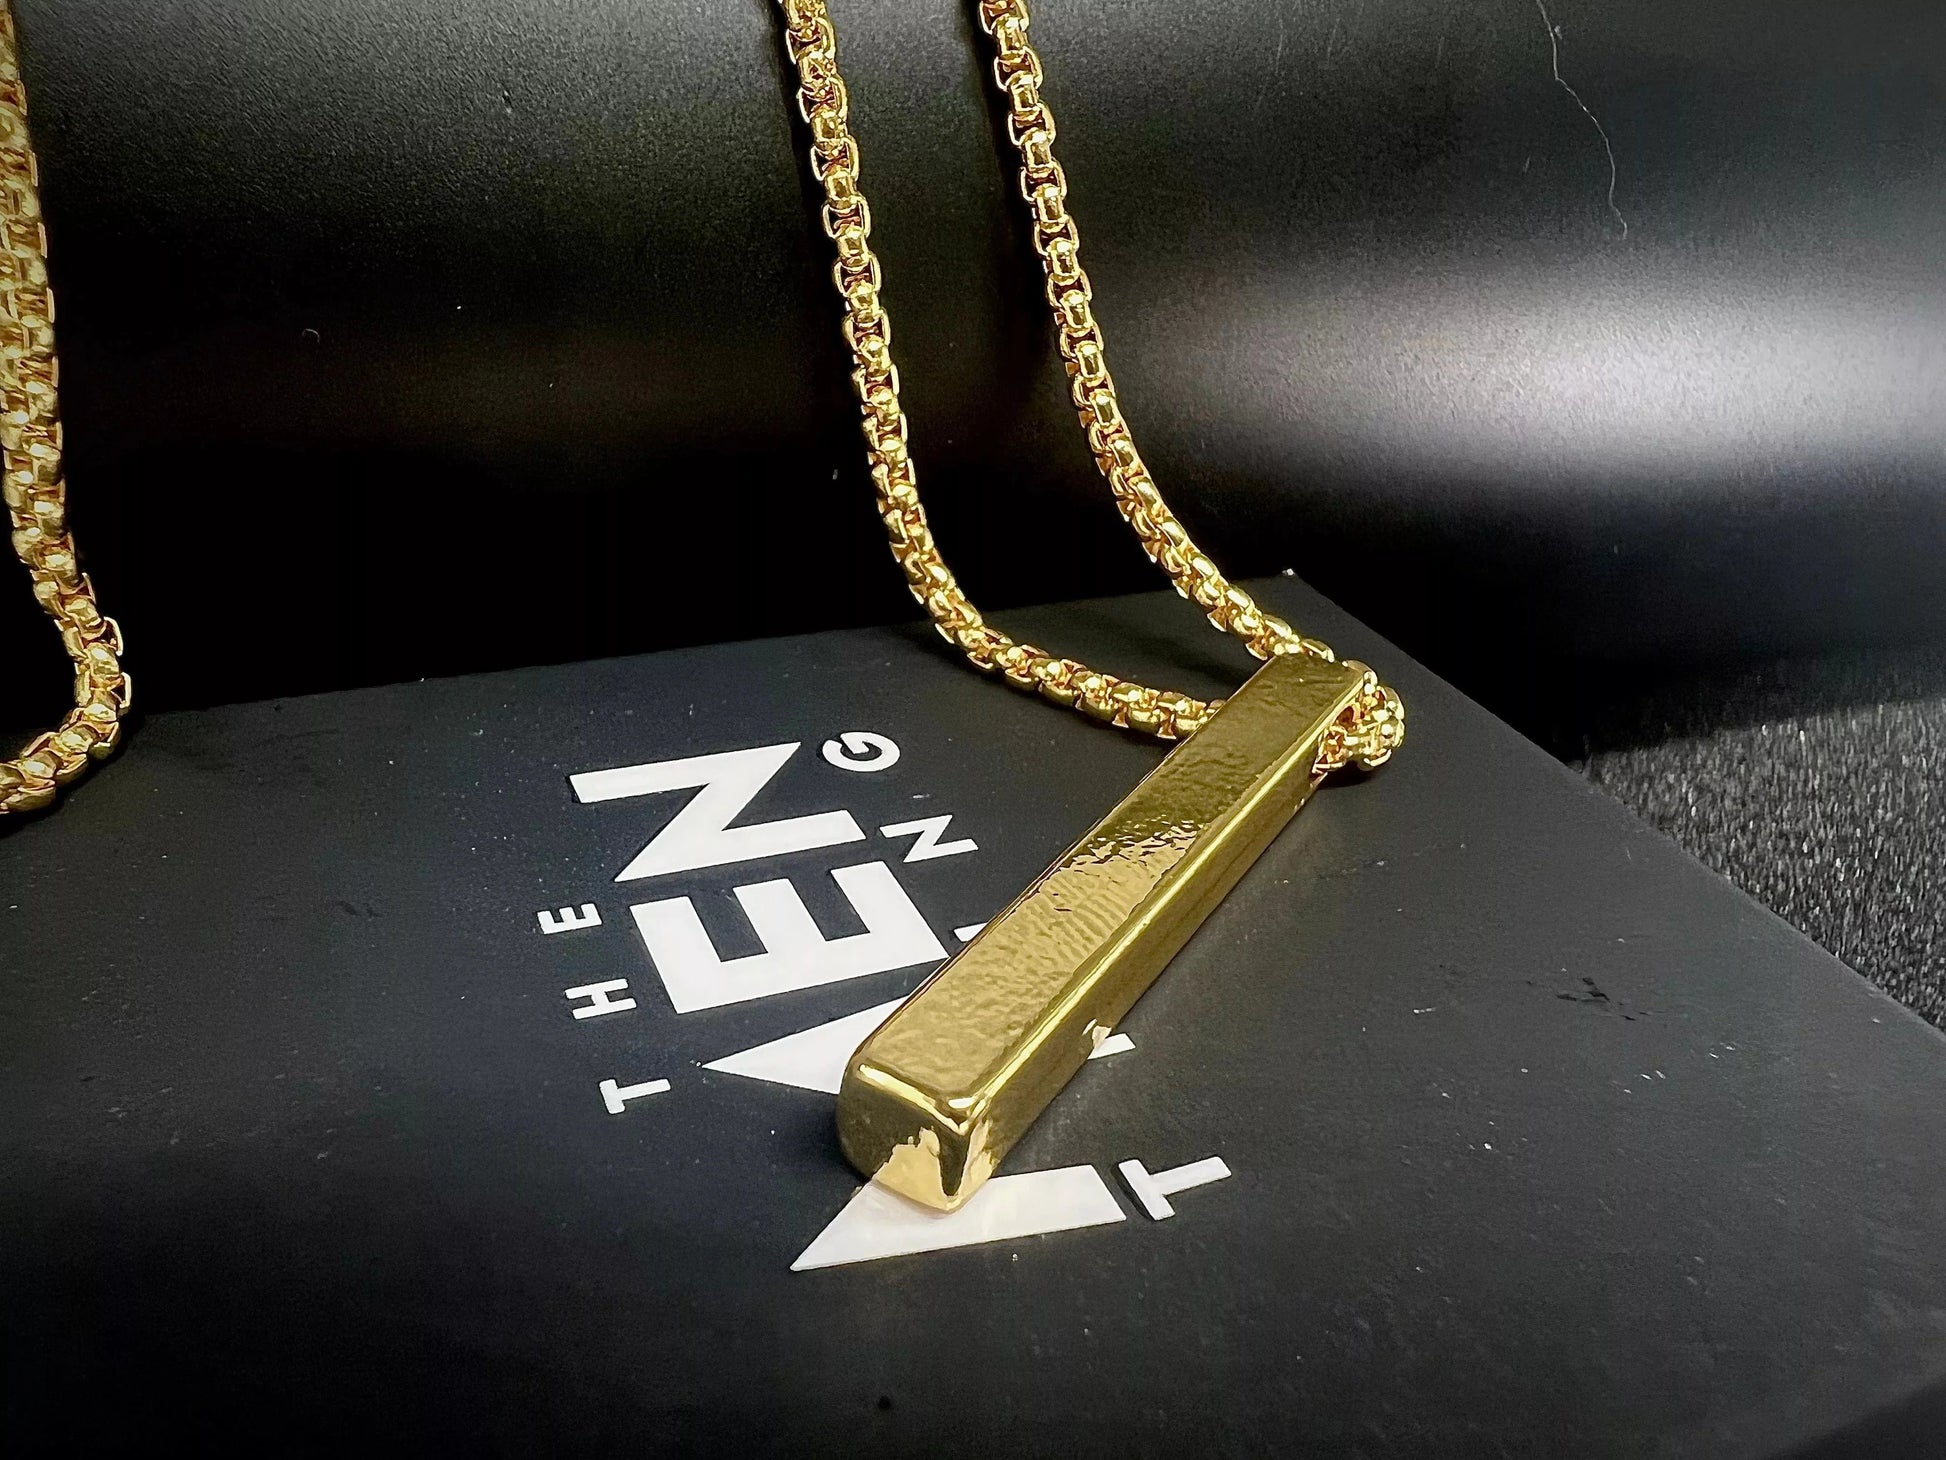 THE MEN THING Alloy Gold Plating Pendant with Pure Stainless Steel24inch Chain for Men, European trending Style - Round Box Chain & Pendant for Men & Boy